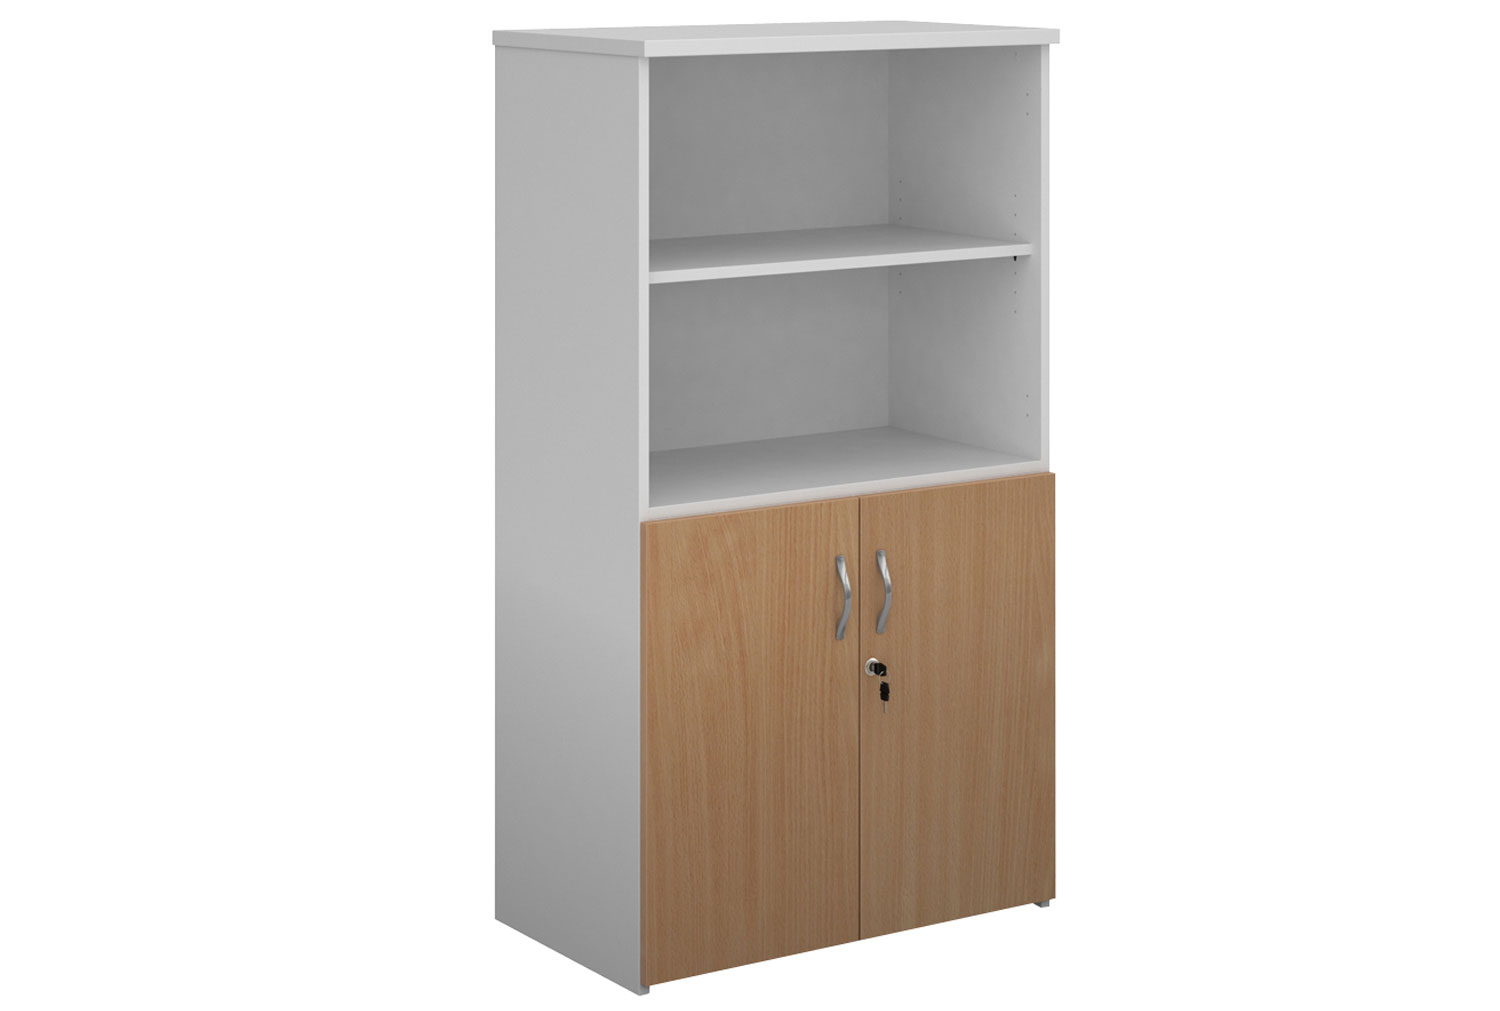 Cantero Home Office Duo Combination Cupboard, 3 Shelf - 80wx47dx144h (cm), Beech, Express Delivery